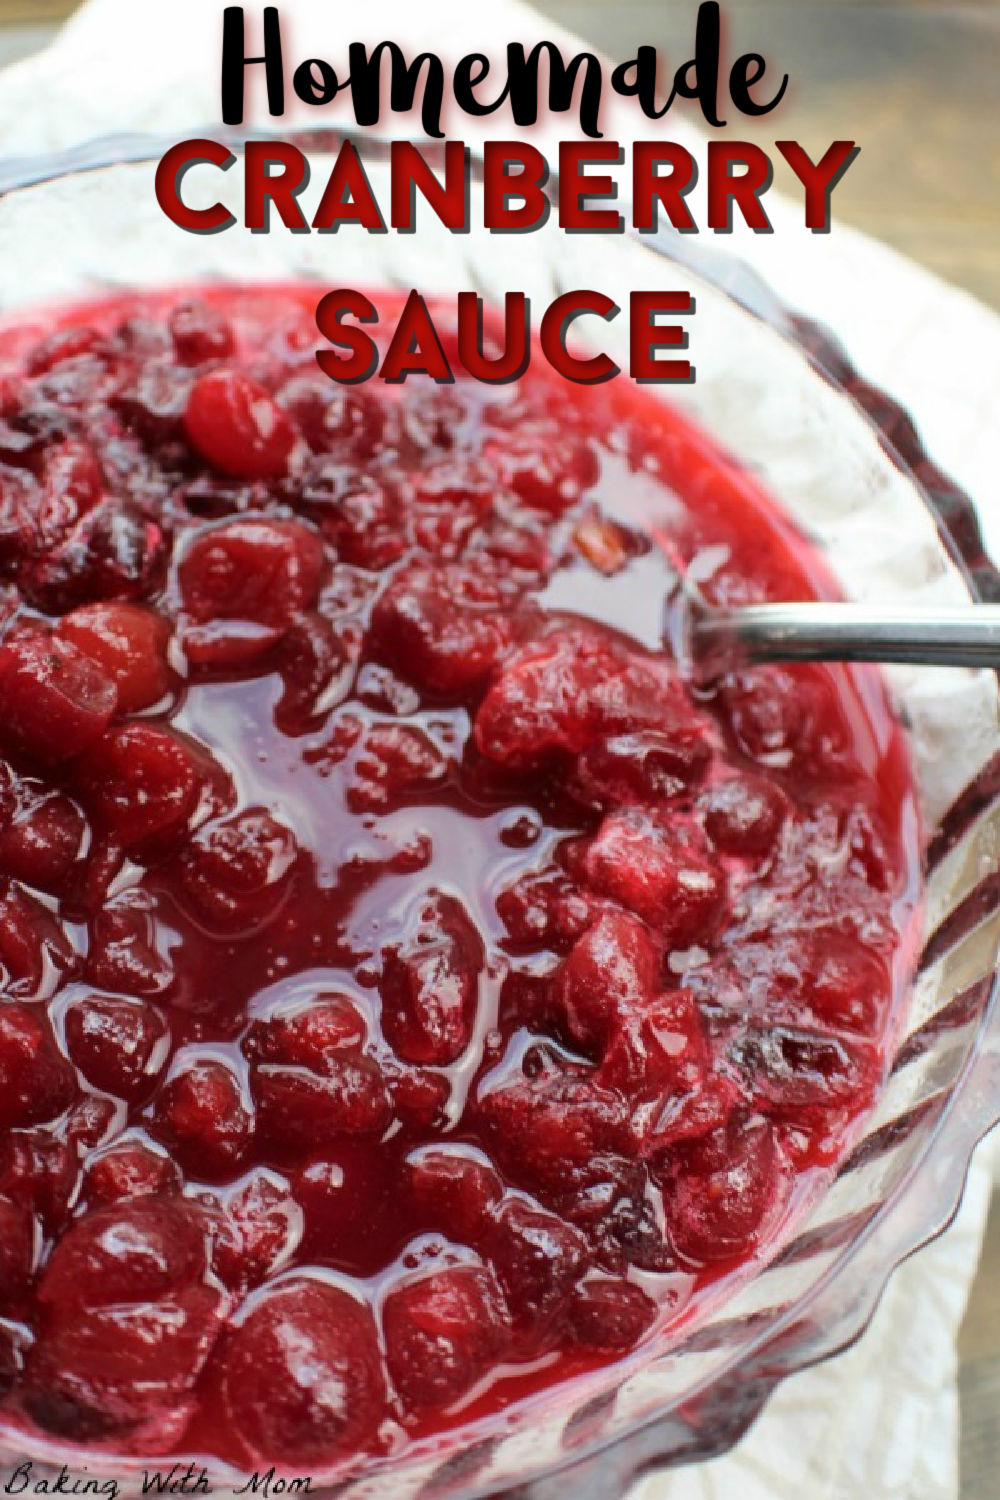 Cranberry sauce in a clear bowl with a towel laying besides